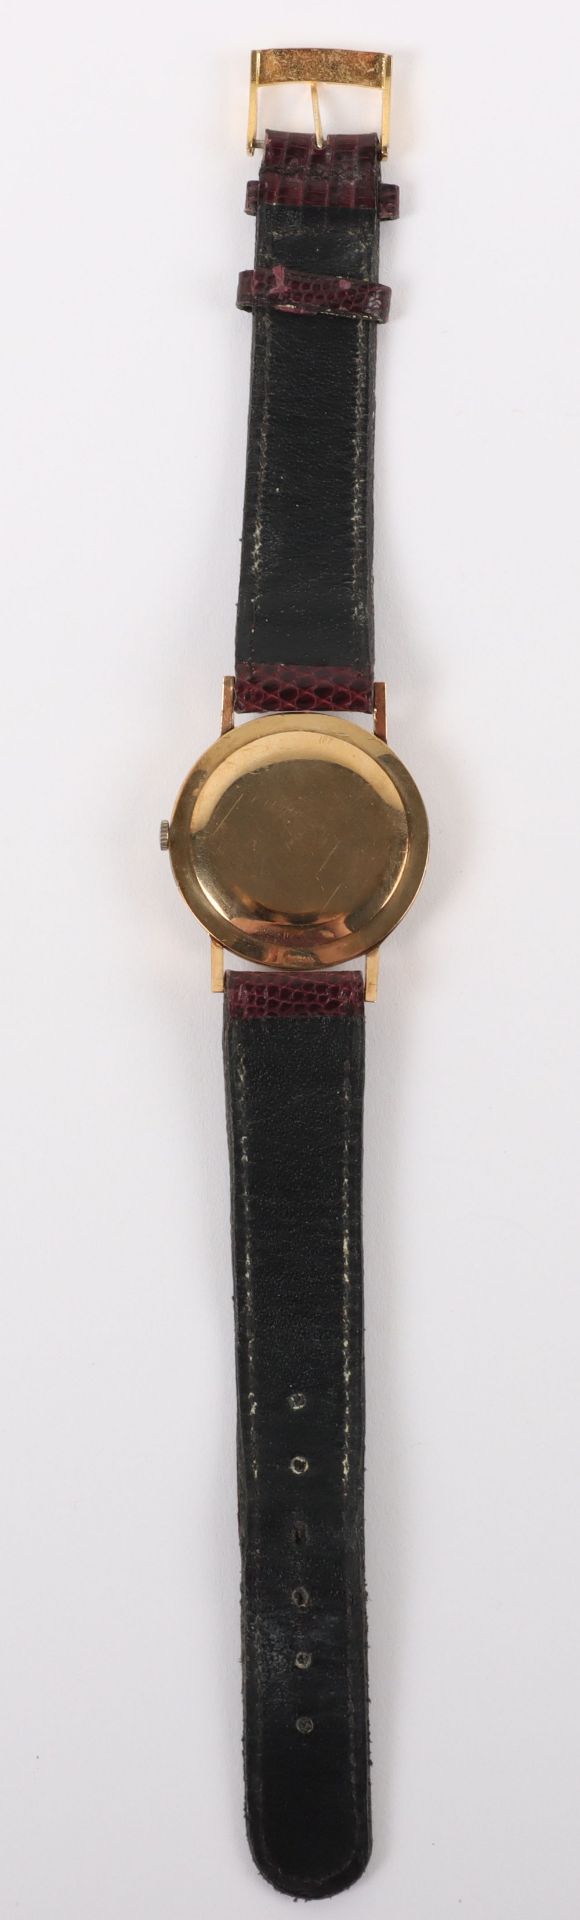 A vintage 9ct gold Marvin wristwatch, circa 1950 - Image 3 of 4